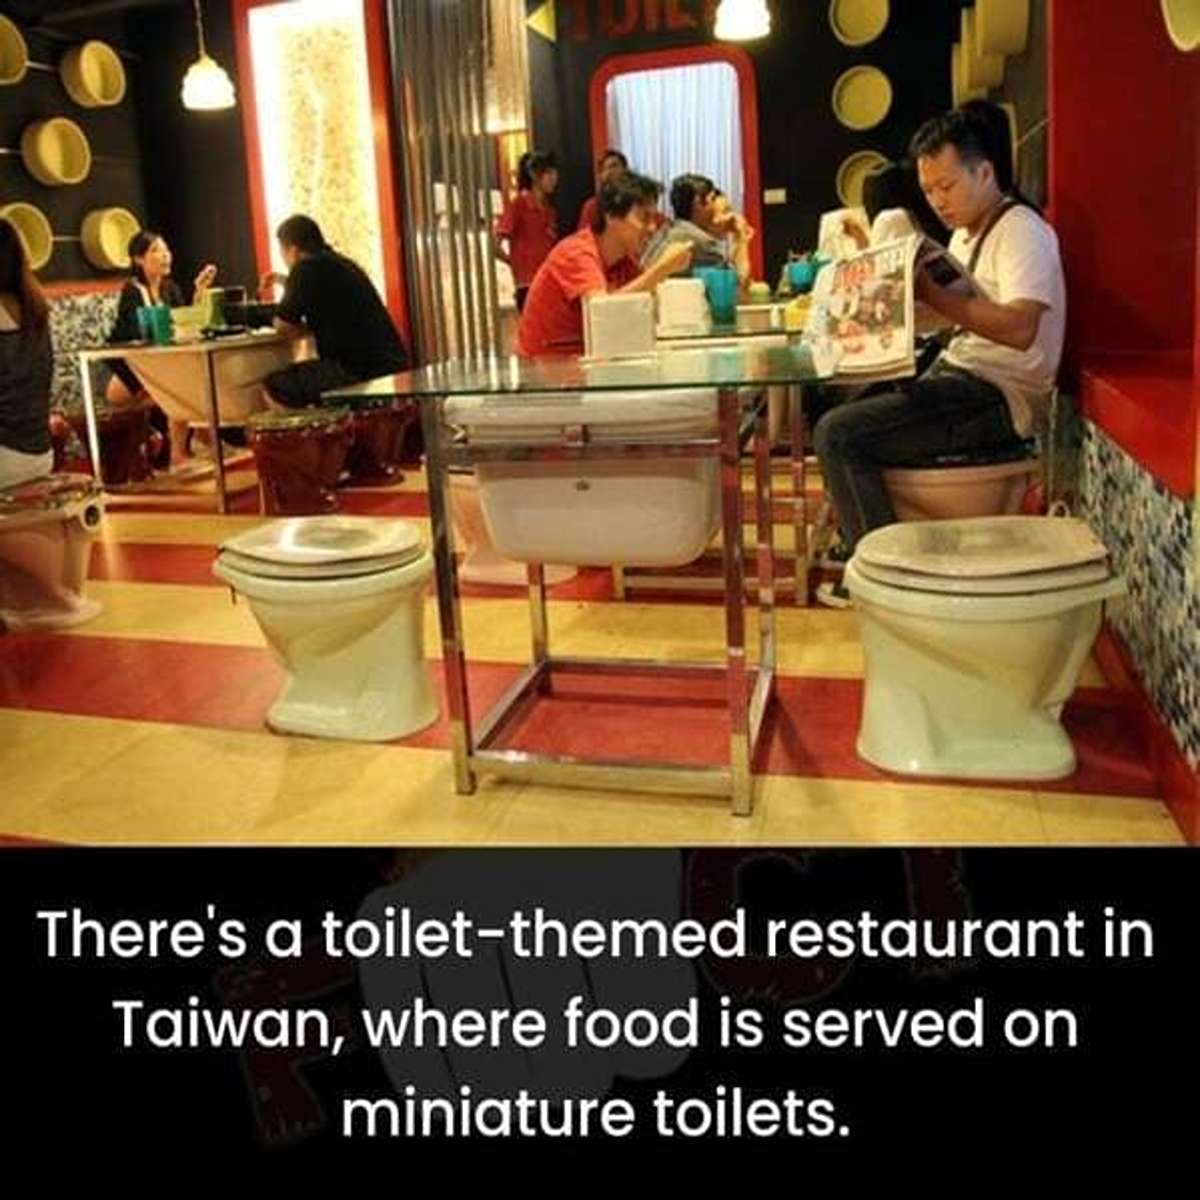 dank memes - meal - There's a toiletthemed restaurant in Taiwan, where food is served on miniature toilets.